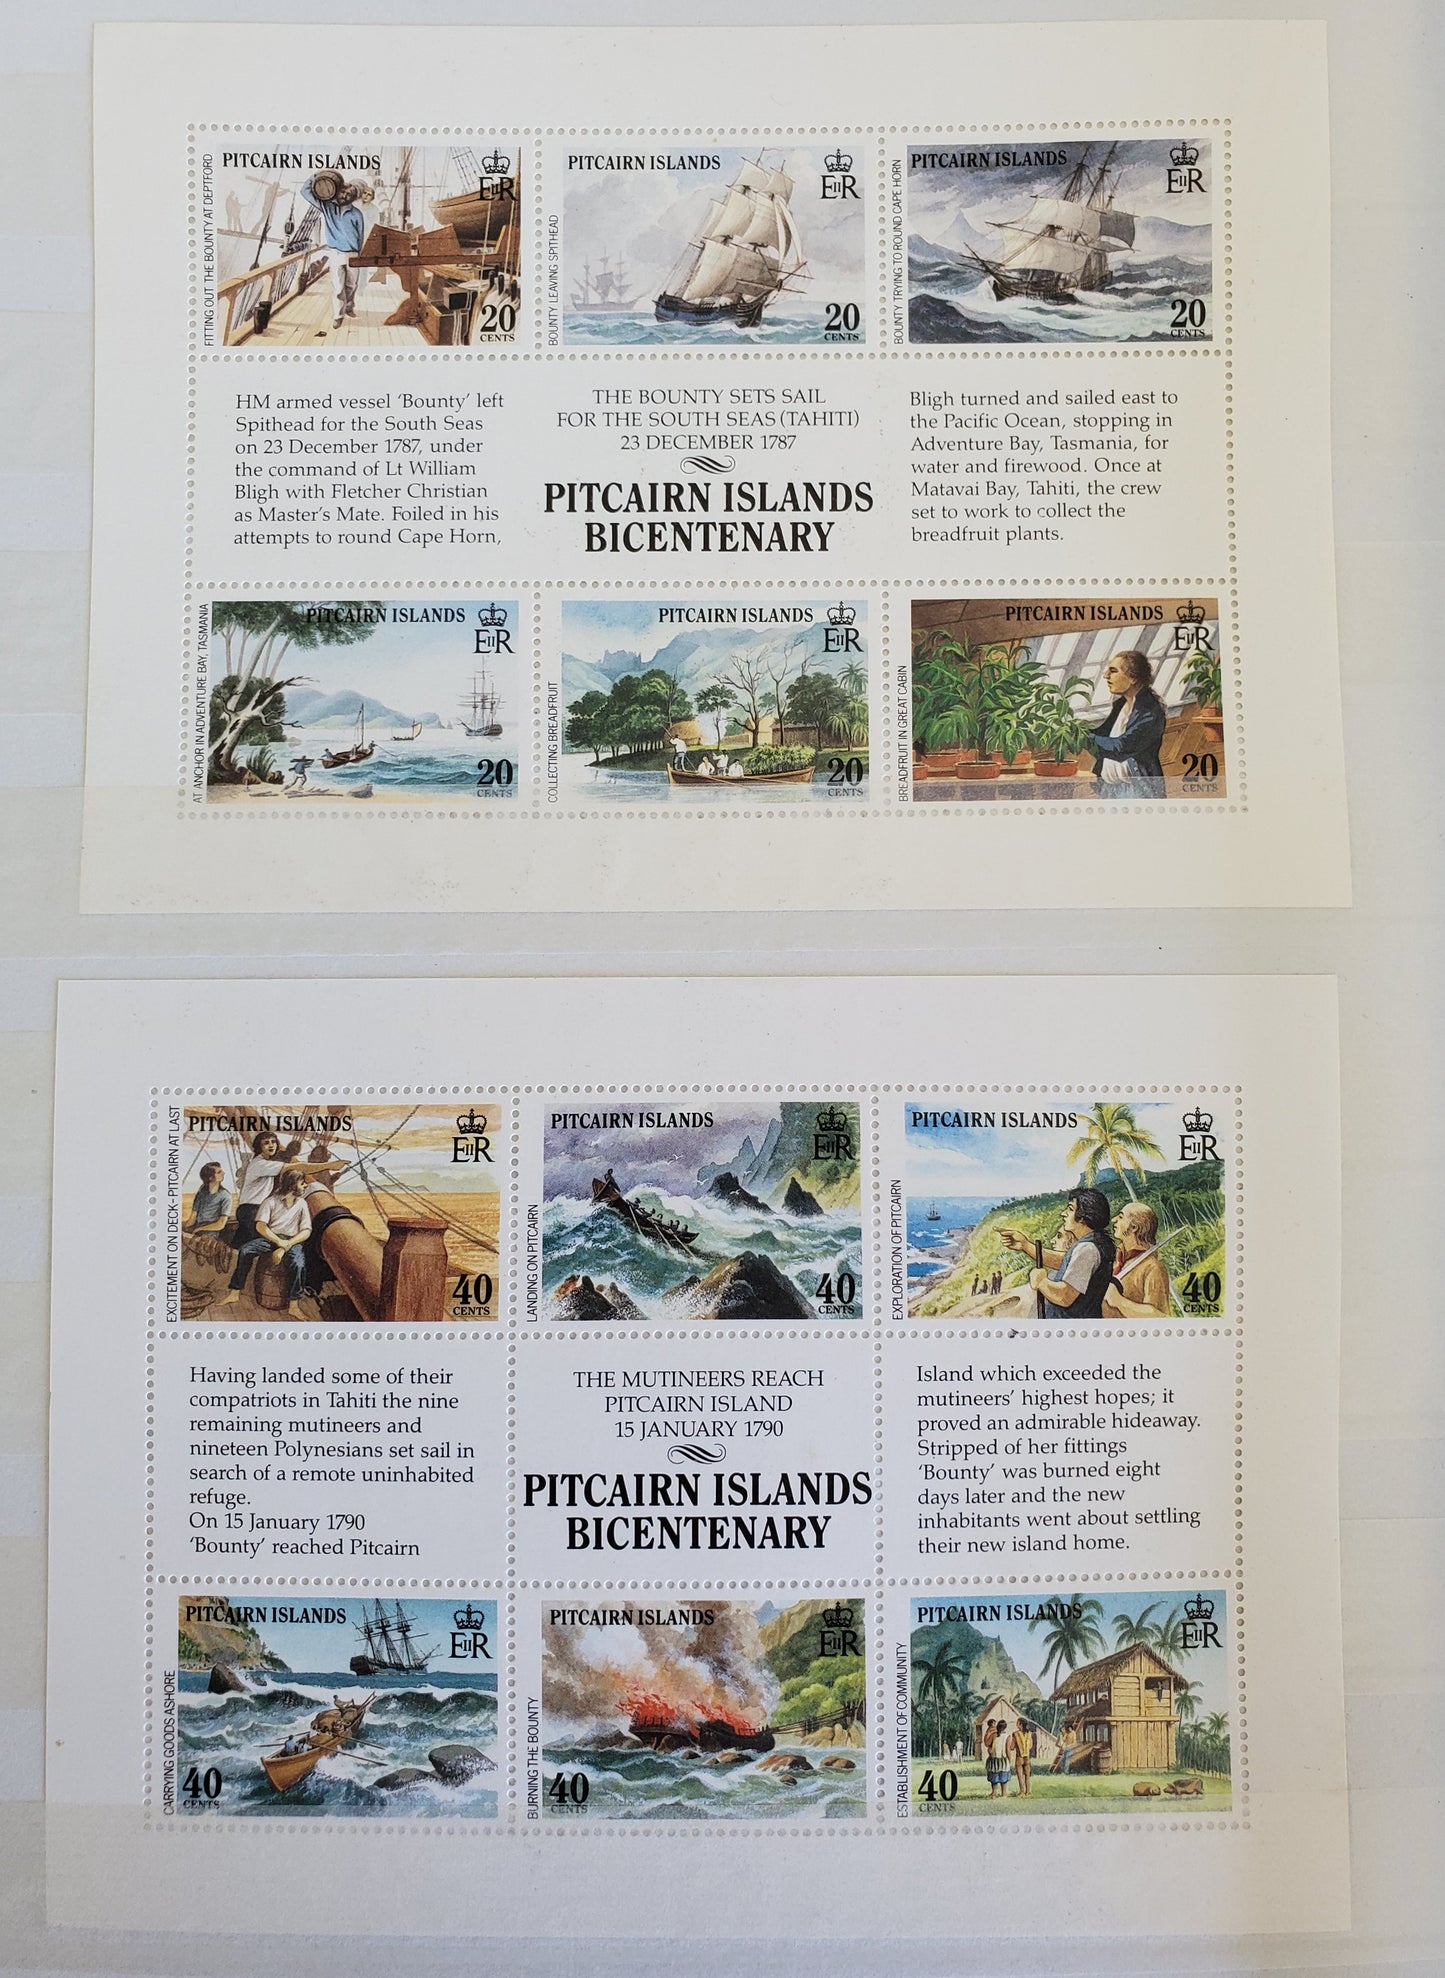 A Complete Collection of Pitcairn Island Stamps - Album